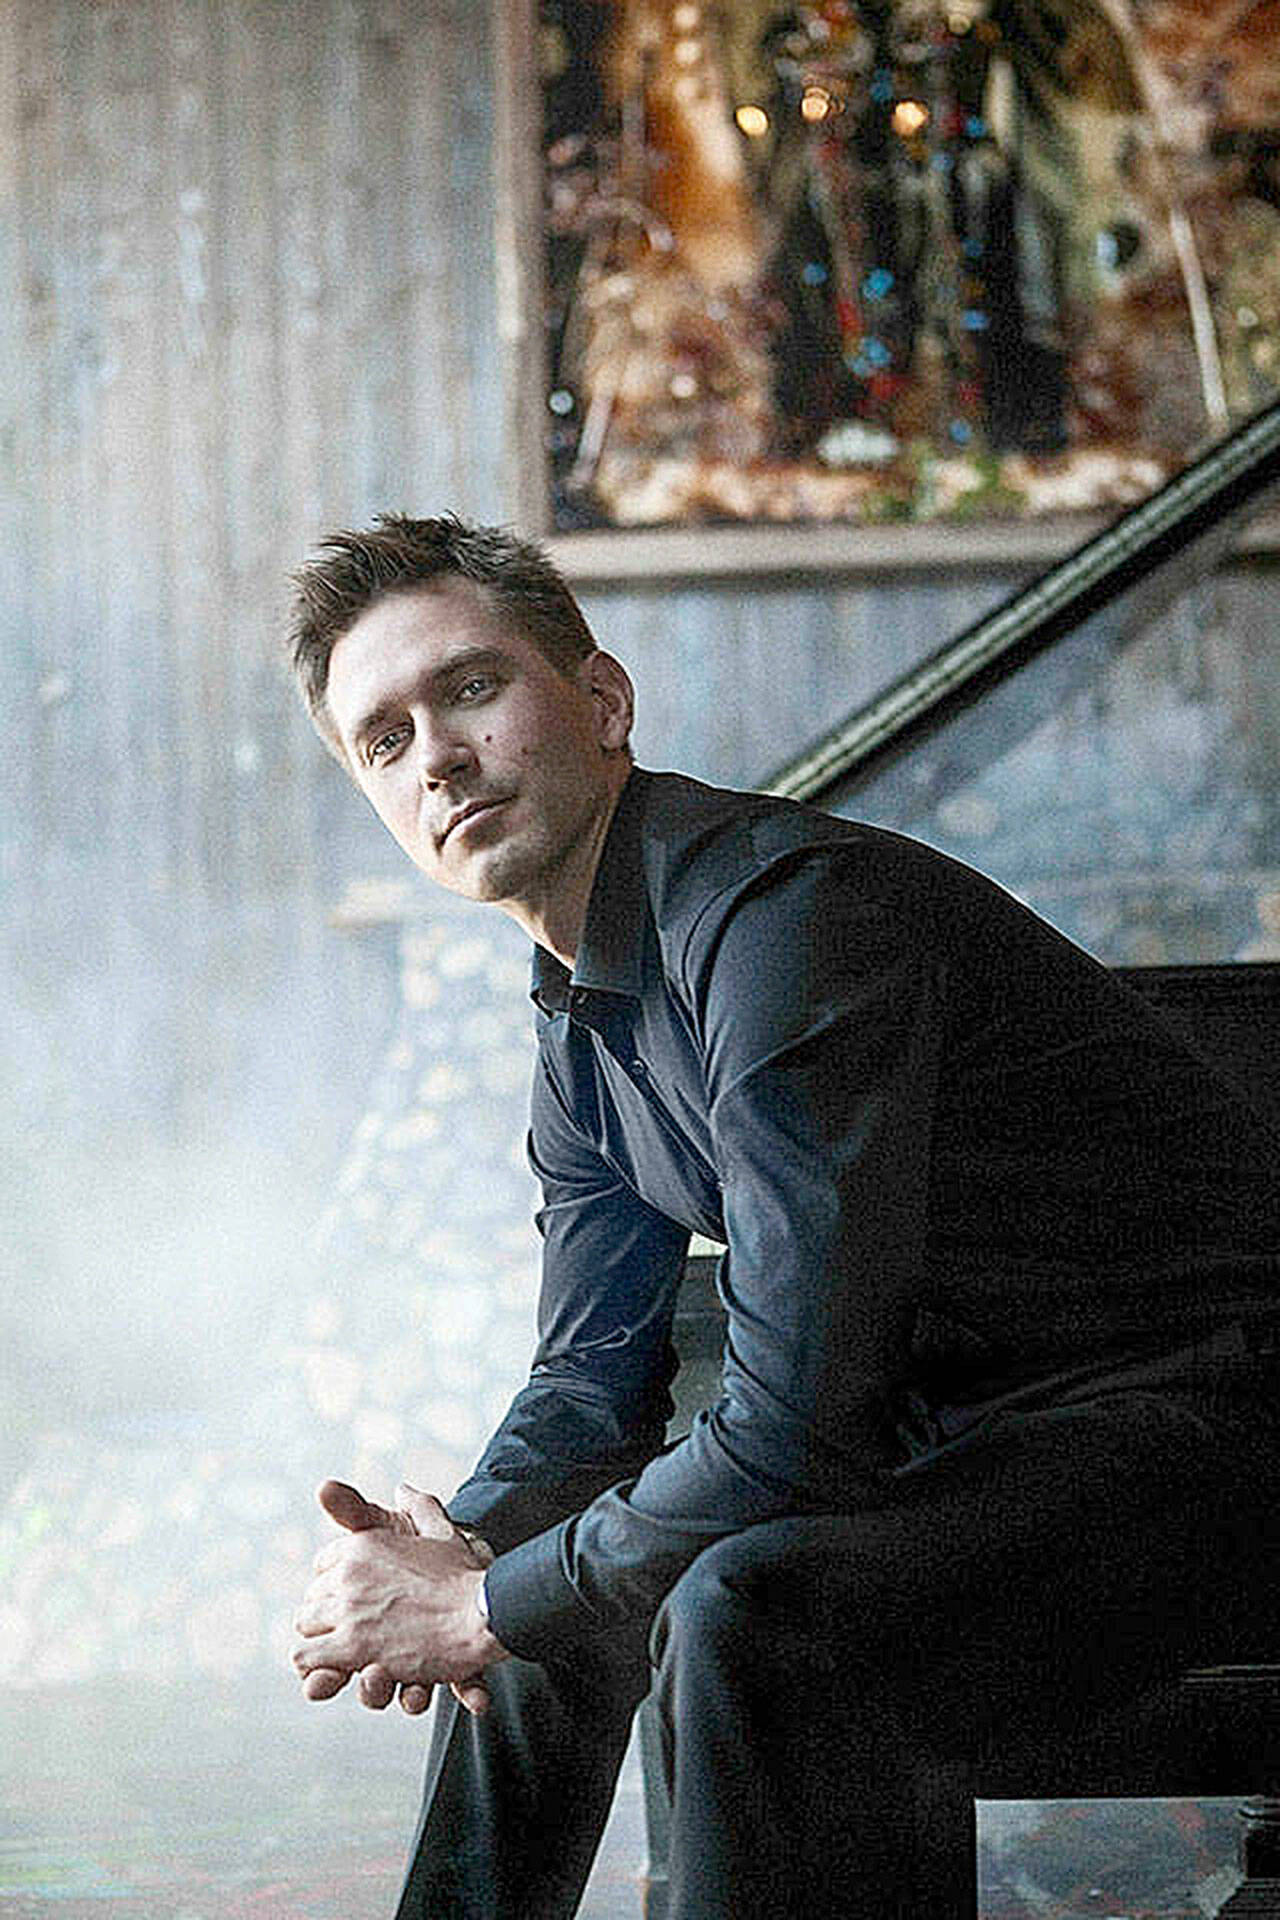 Vyacheslav Gryaznov, better known on Vashon as “Slava,” will bring two virtuoso pianists with him to a week-long residency at Vashon Center for the Arts, which will include four concert performances. (Courtesy Photo)